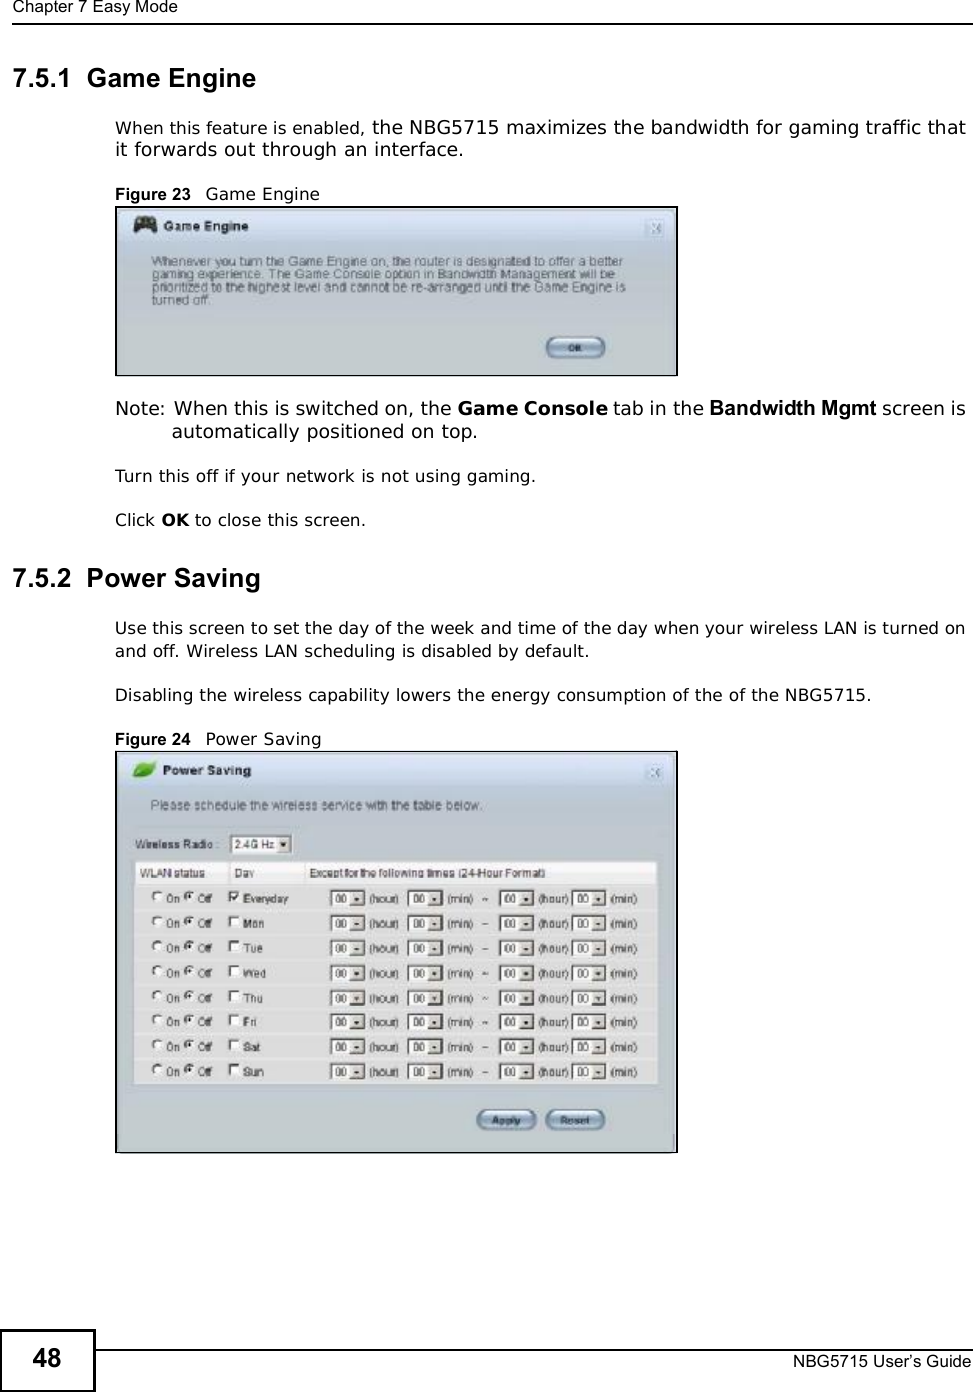 Chapter 7Easy ModeNBG5715 User’s Guide487.5.1  Game EngineWhen this feature is enabled, the NBG5715 maximizes the bandwidth for gaming traffic that it forwards out through an interface.Figure 23   Game EngineNote: When this is switched on, the Game Console tab in the Bandwidth Mgmt screen is automatically positioned on top. Turn this off if your network is not using gaming.Click OK to close this screen.7.5.2  Power SavingUse this screen to set the day of the week and time of the day when your wireless LAN is turned on and off. Wireless LAN scheduling is disabled by default. Disabling the wireless capability lowers the energy consumption of the of the NBG5715. Figure 24   Power Saving 